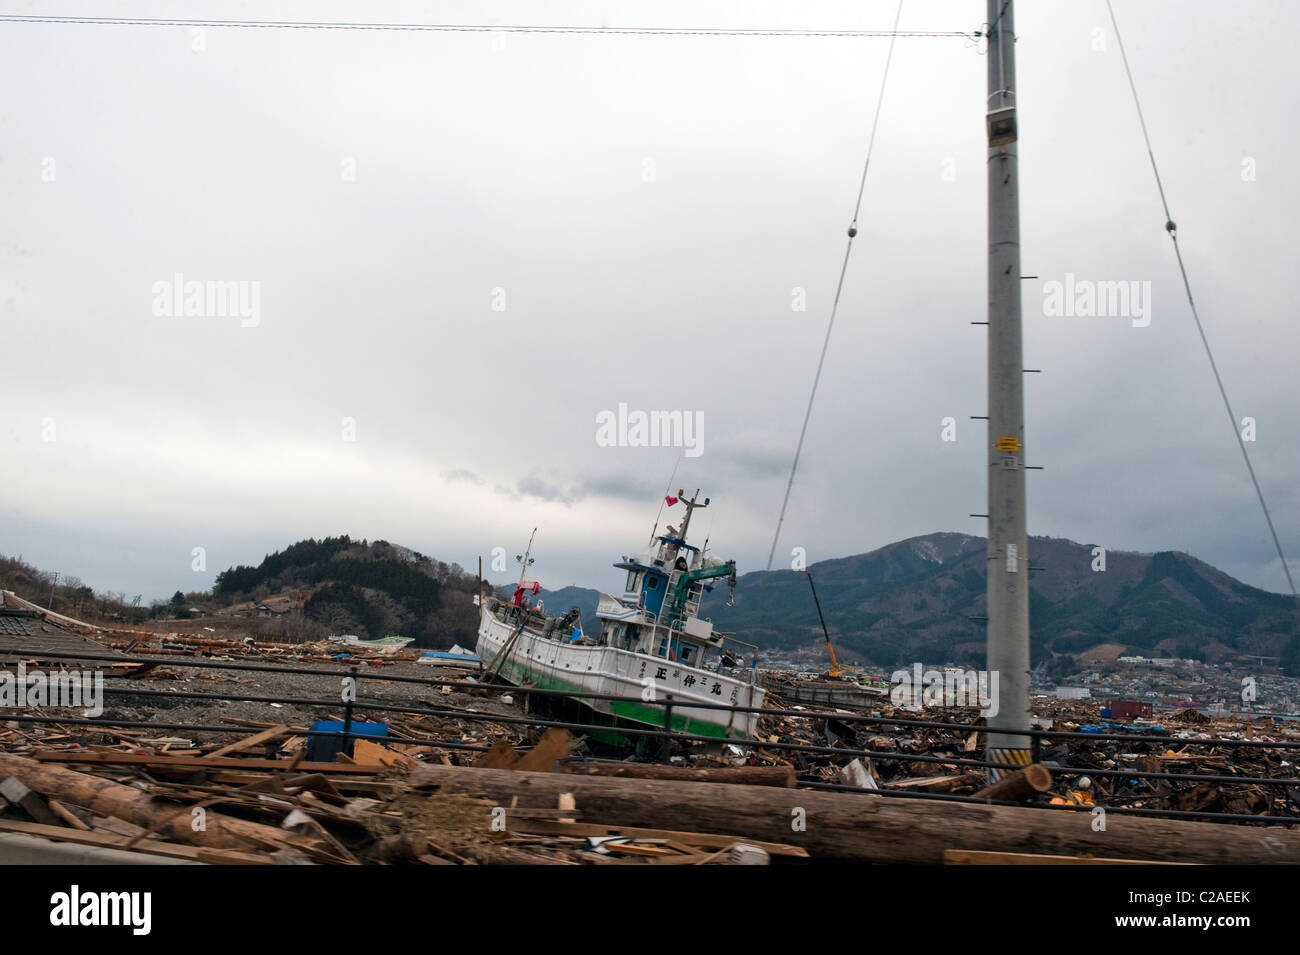 Fishing boat miles from the coast after a 9.0 Mw earthquake triggered a Tsunami destroying large parts of Ofunato, Japan 2011 Stock Photo